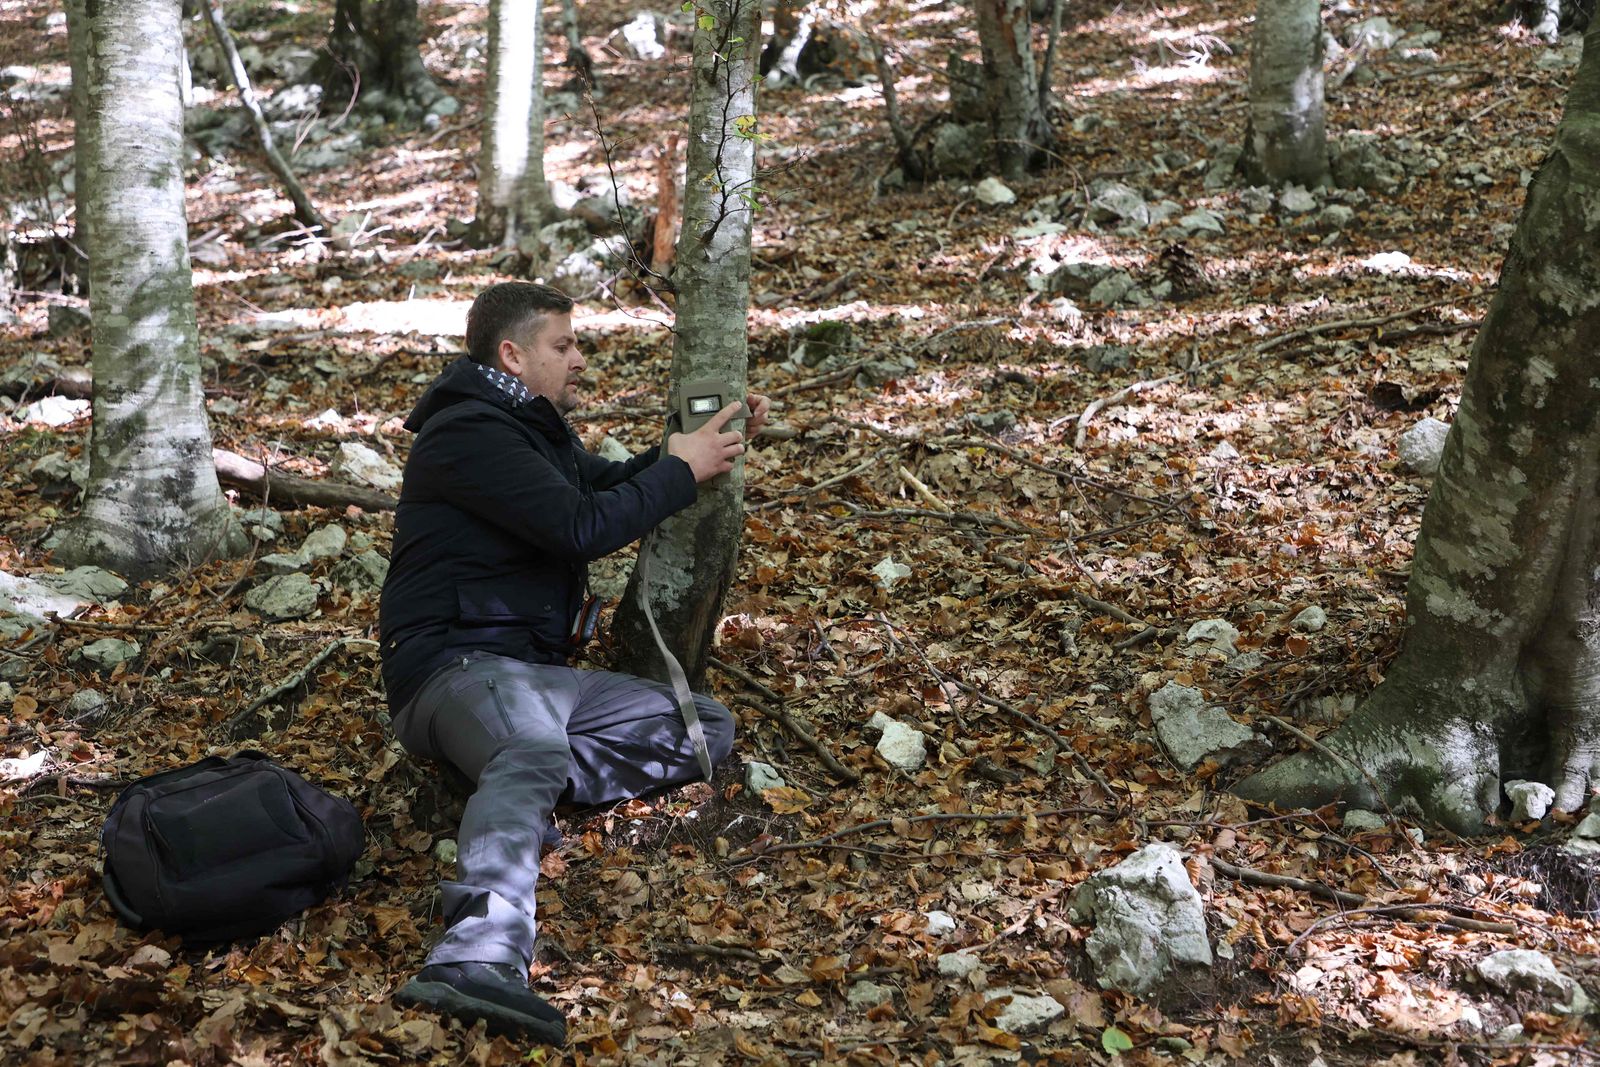 In this photograph taken on October 21, 2022, biodiversity expert Blendi Hoxha from the non-governmental organization of Protection and Preservation of Natural Environment in Albania (PPNEA), removes a wildlife trail camera to check for images of Balkan lynx at the protected area of Bize-Martanesh, near Diber County in Peshkopi, central Albania. - Experts of the non-governmental organization Protection and Preservation of Natural Environment in Albania (PPNEA) are installing wildlife trail cameras and looking to find evidence of critically endangered Balkan lynx that are estimated fewer than 40 remaining in the Balkans, of which less than 10 in Albania. (Photo by Gent SHKULLAKU / AFP) - AFP